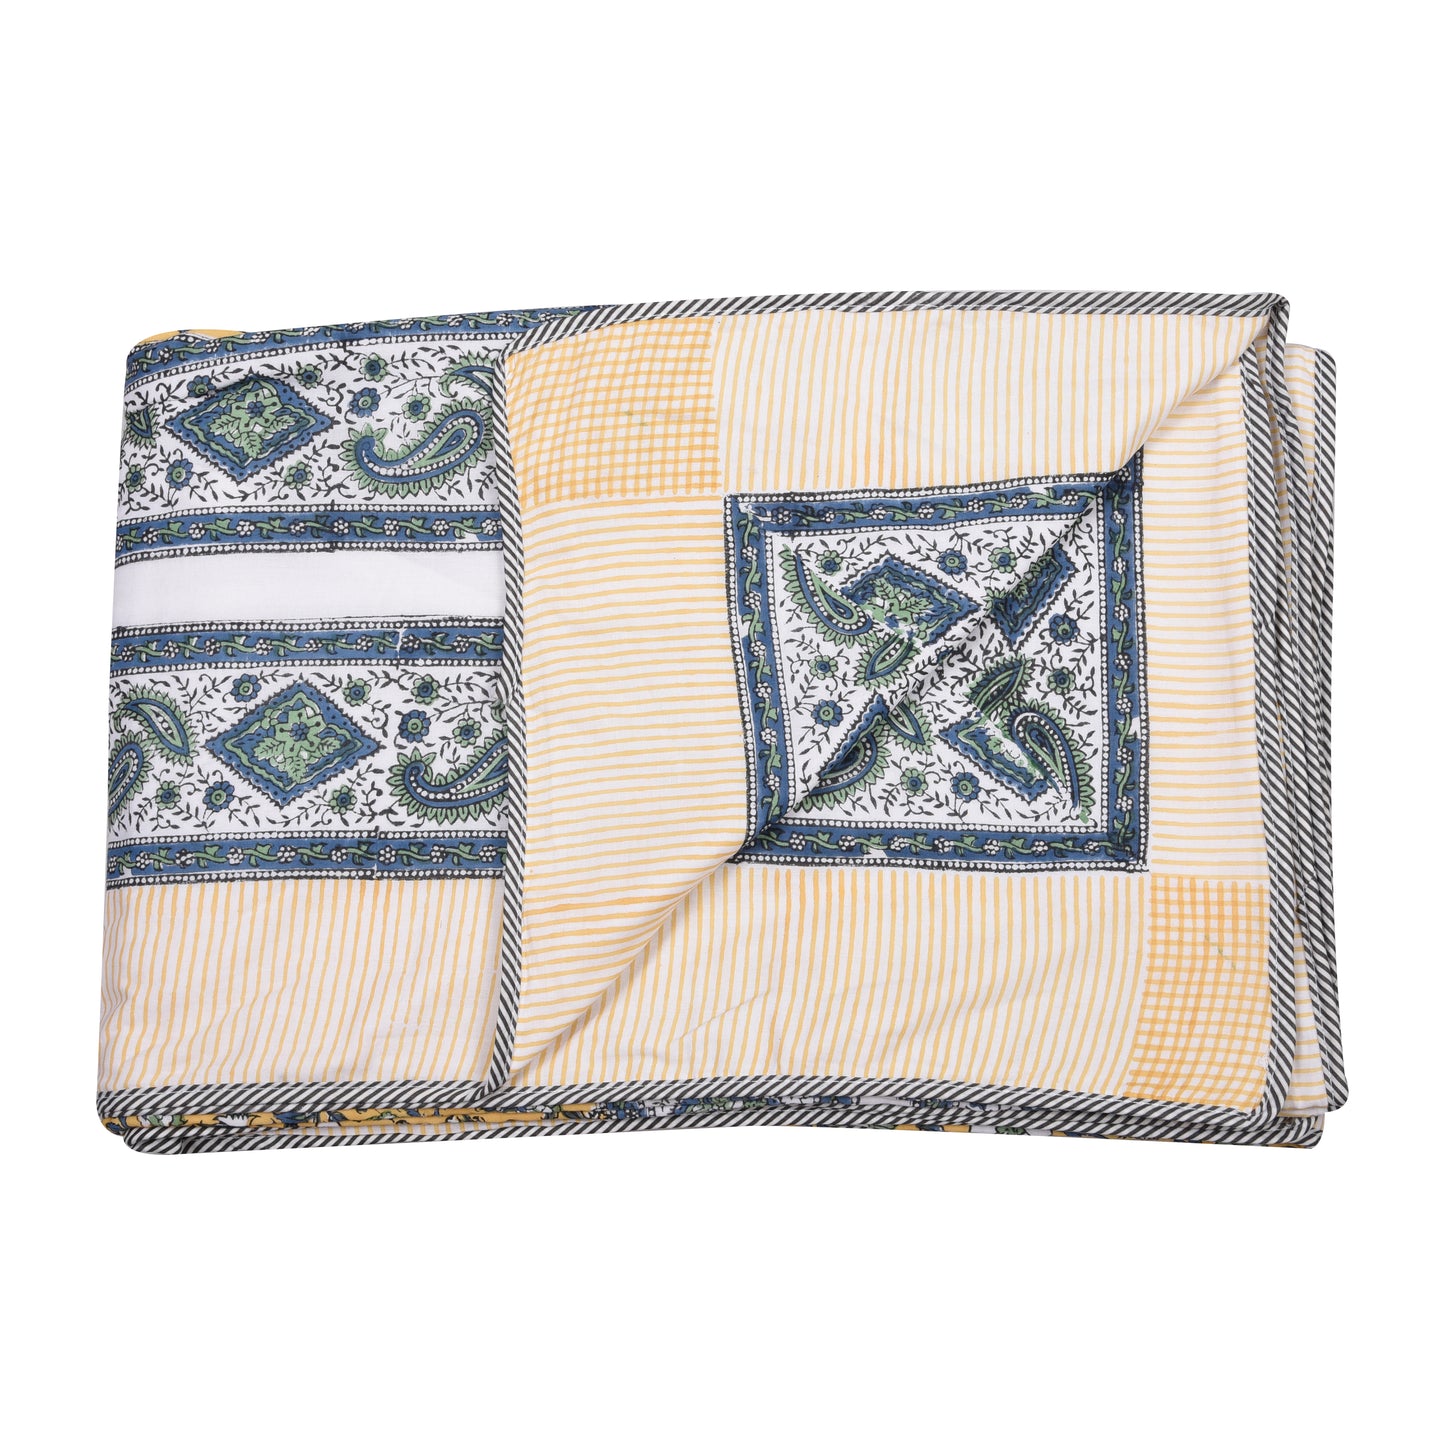 Cotton Blanket - Single Dohar ( 60 x 90 Inches) Green Yellow Blue Floral